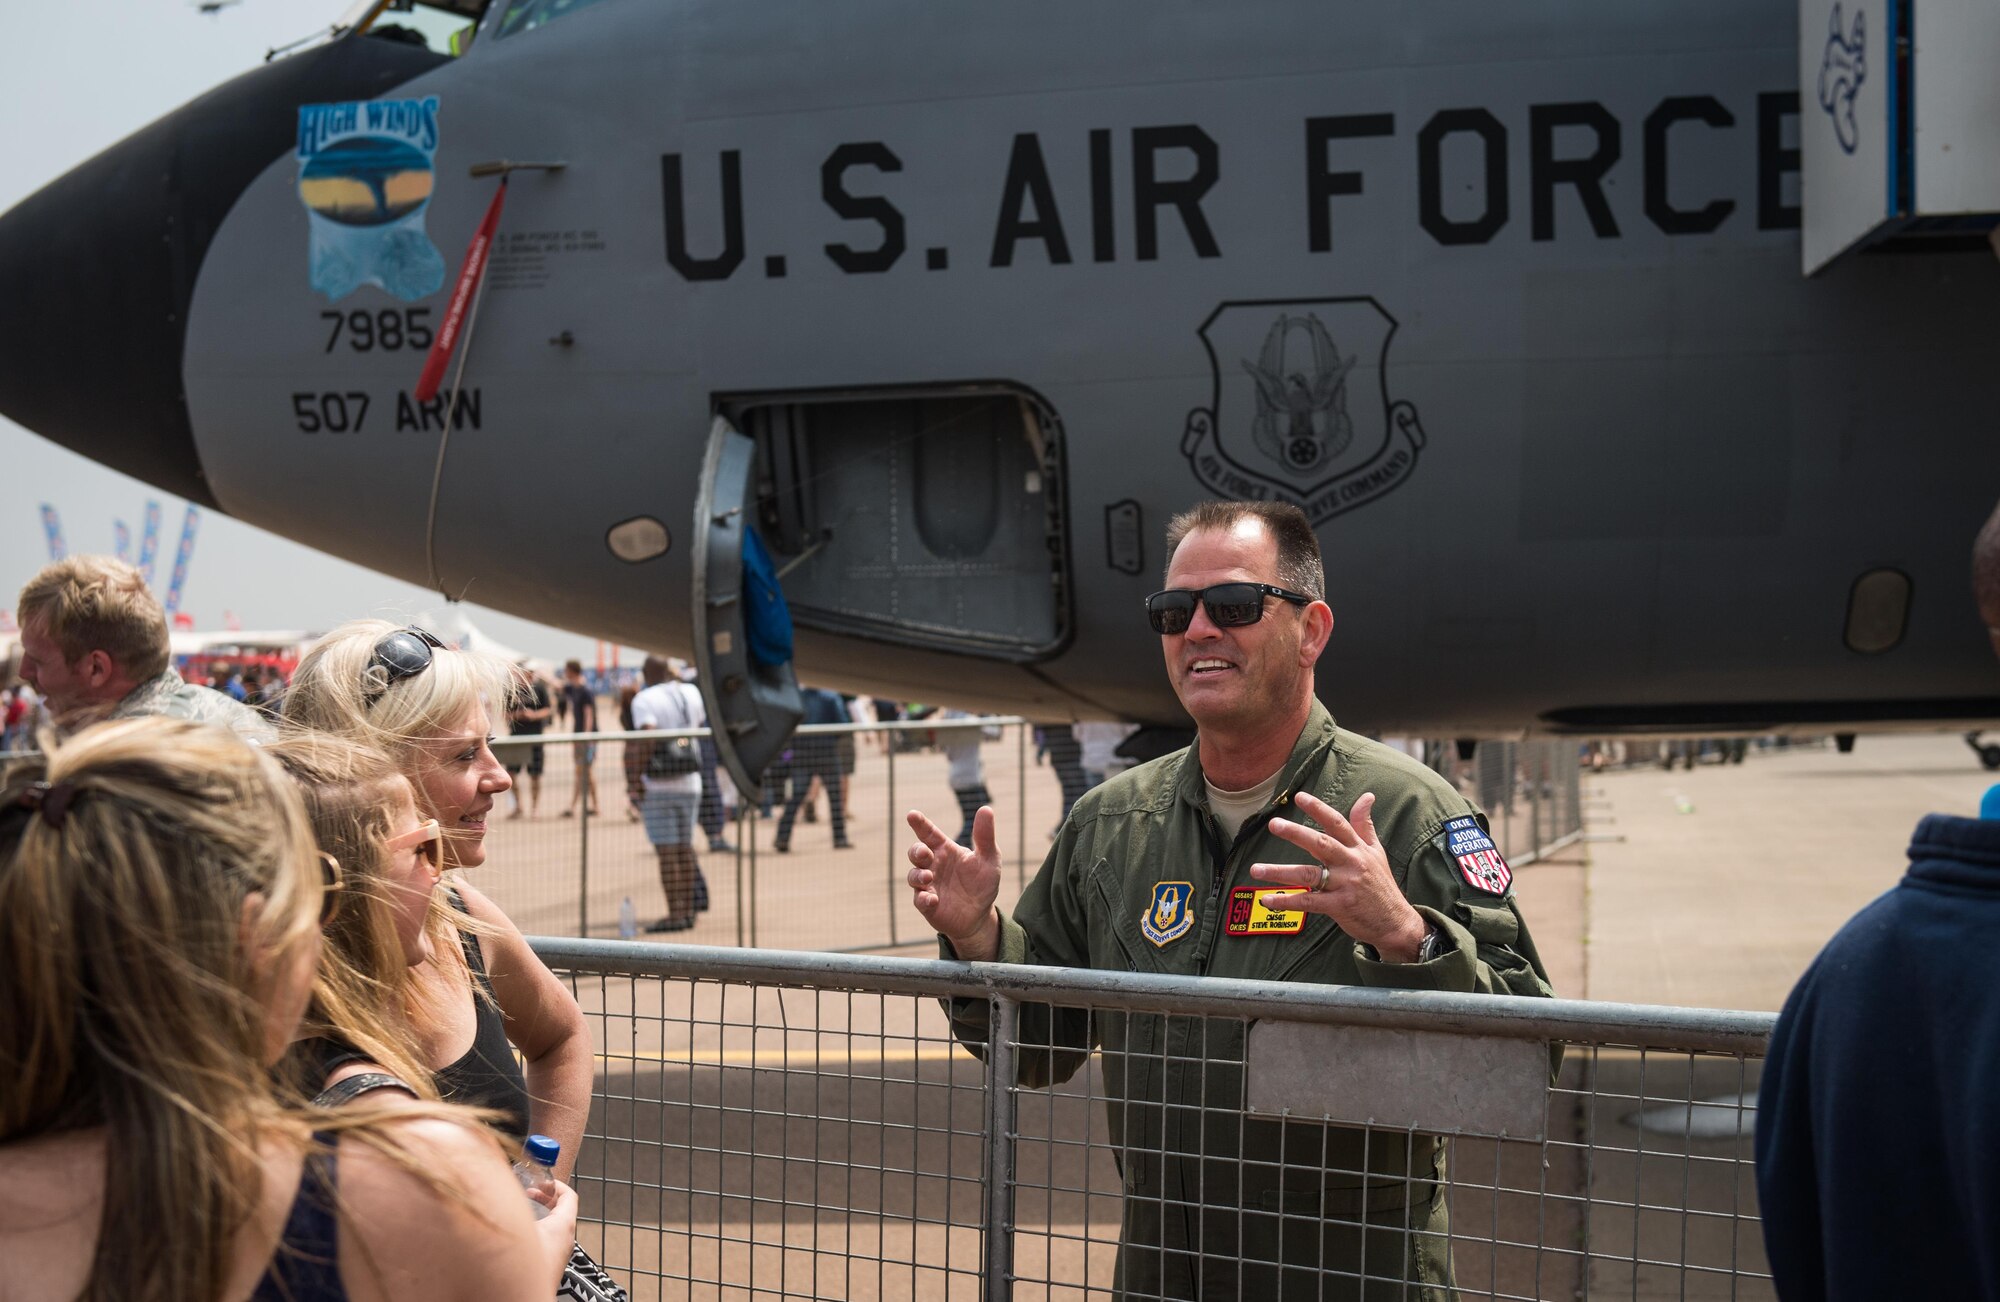 Chief Master Sgt. Steve Robinson, KC-135 boom operator from Oklahoma, explains the mission of his aircraft to airshow attendees at the Africa Aerospace and Defense Expo at Waterkloof Air Force Base, South Africa, Sept. 17, 2016. The U.S. military is exhibiting a C-17 Globemaster III, a KC-135 Stratotanker, a C-130J Super Hercules, an HC-130 King, and an MQ-9 Reaper. The aircraft come from various Air National Guard and Air Force Reserve Command units. The U.S. routinely participates in events like AADE to strengthen partnerships with regional partners. (U.S. Air Force photo by Tech. Sgt. Ryan Crane)